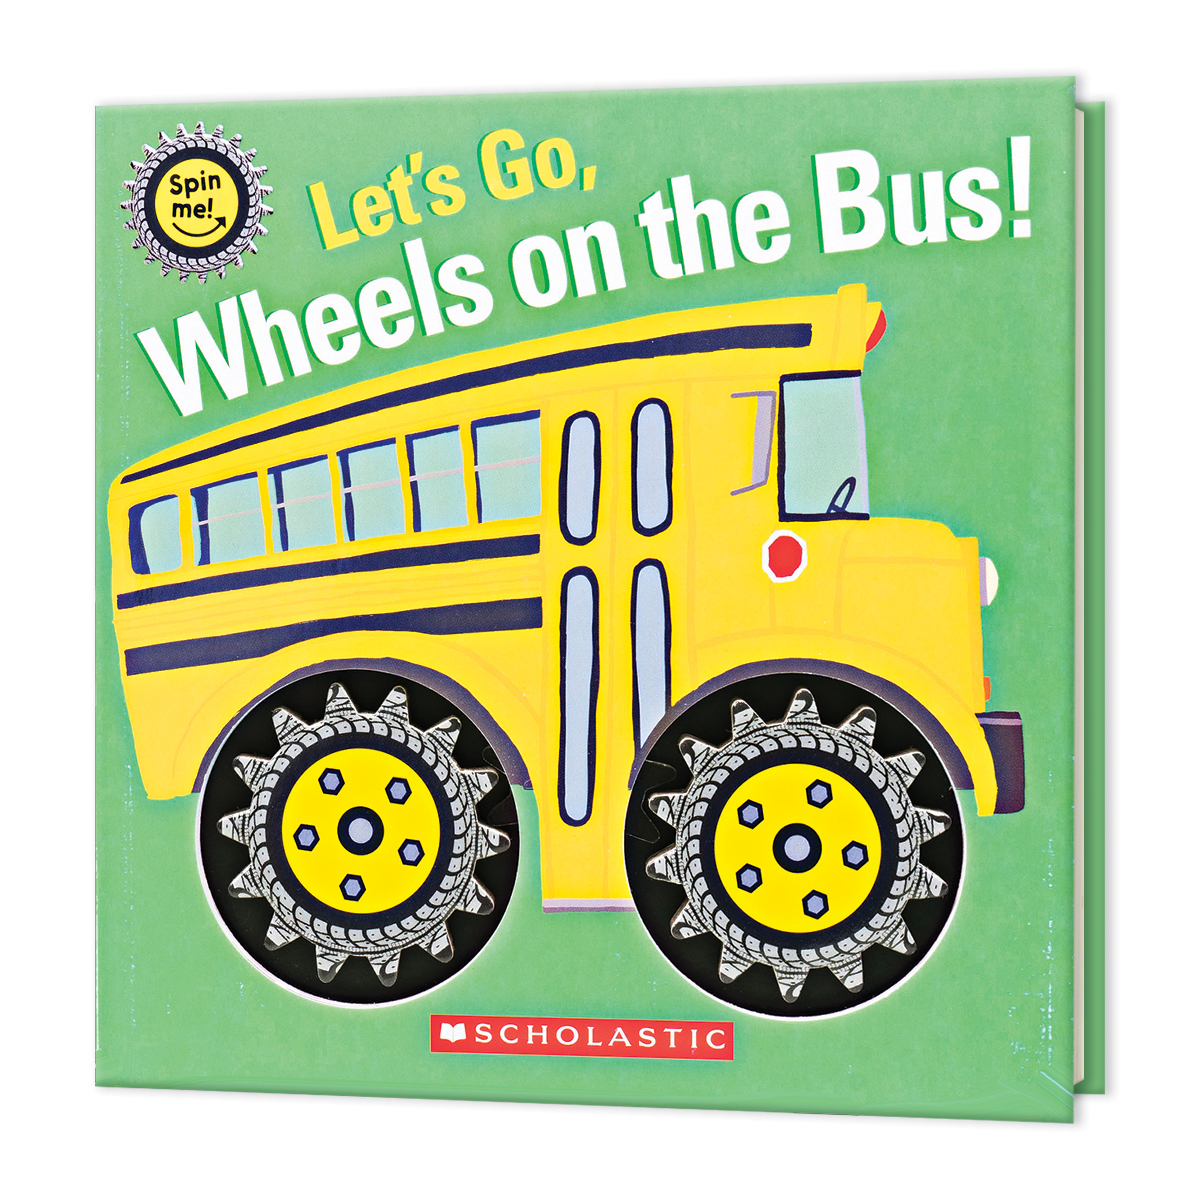  Let's Go, Wheels on the Bus! 